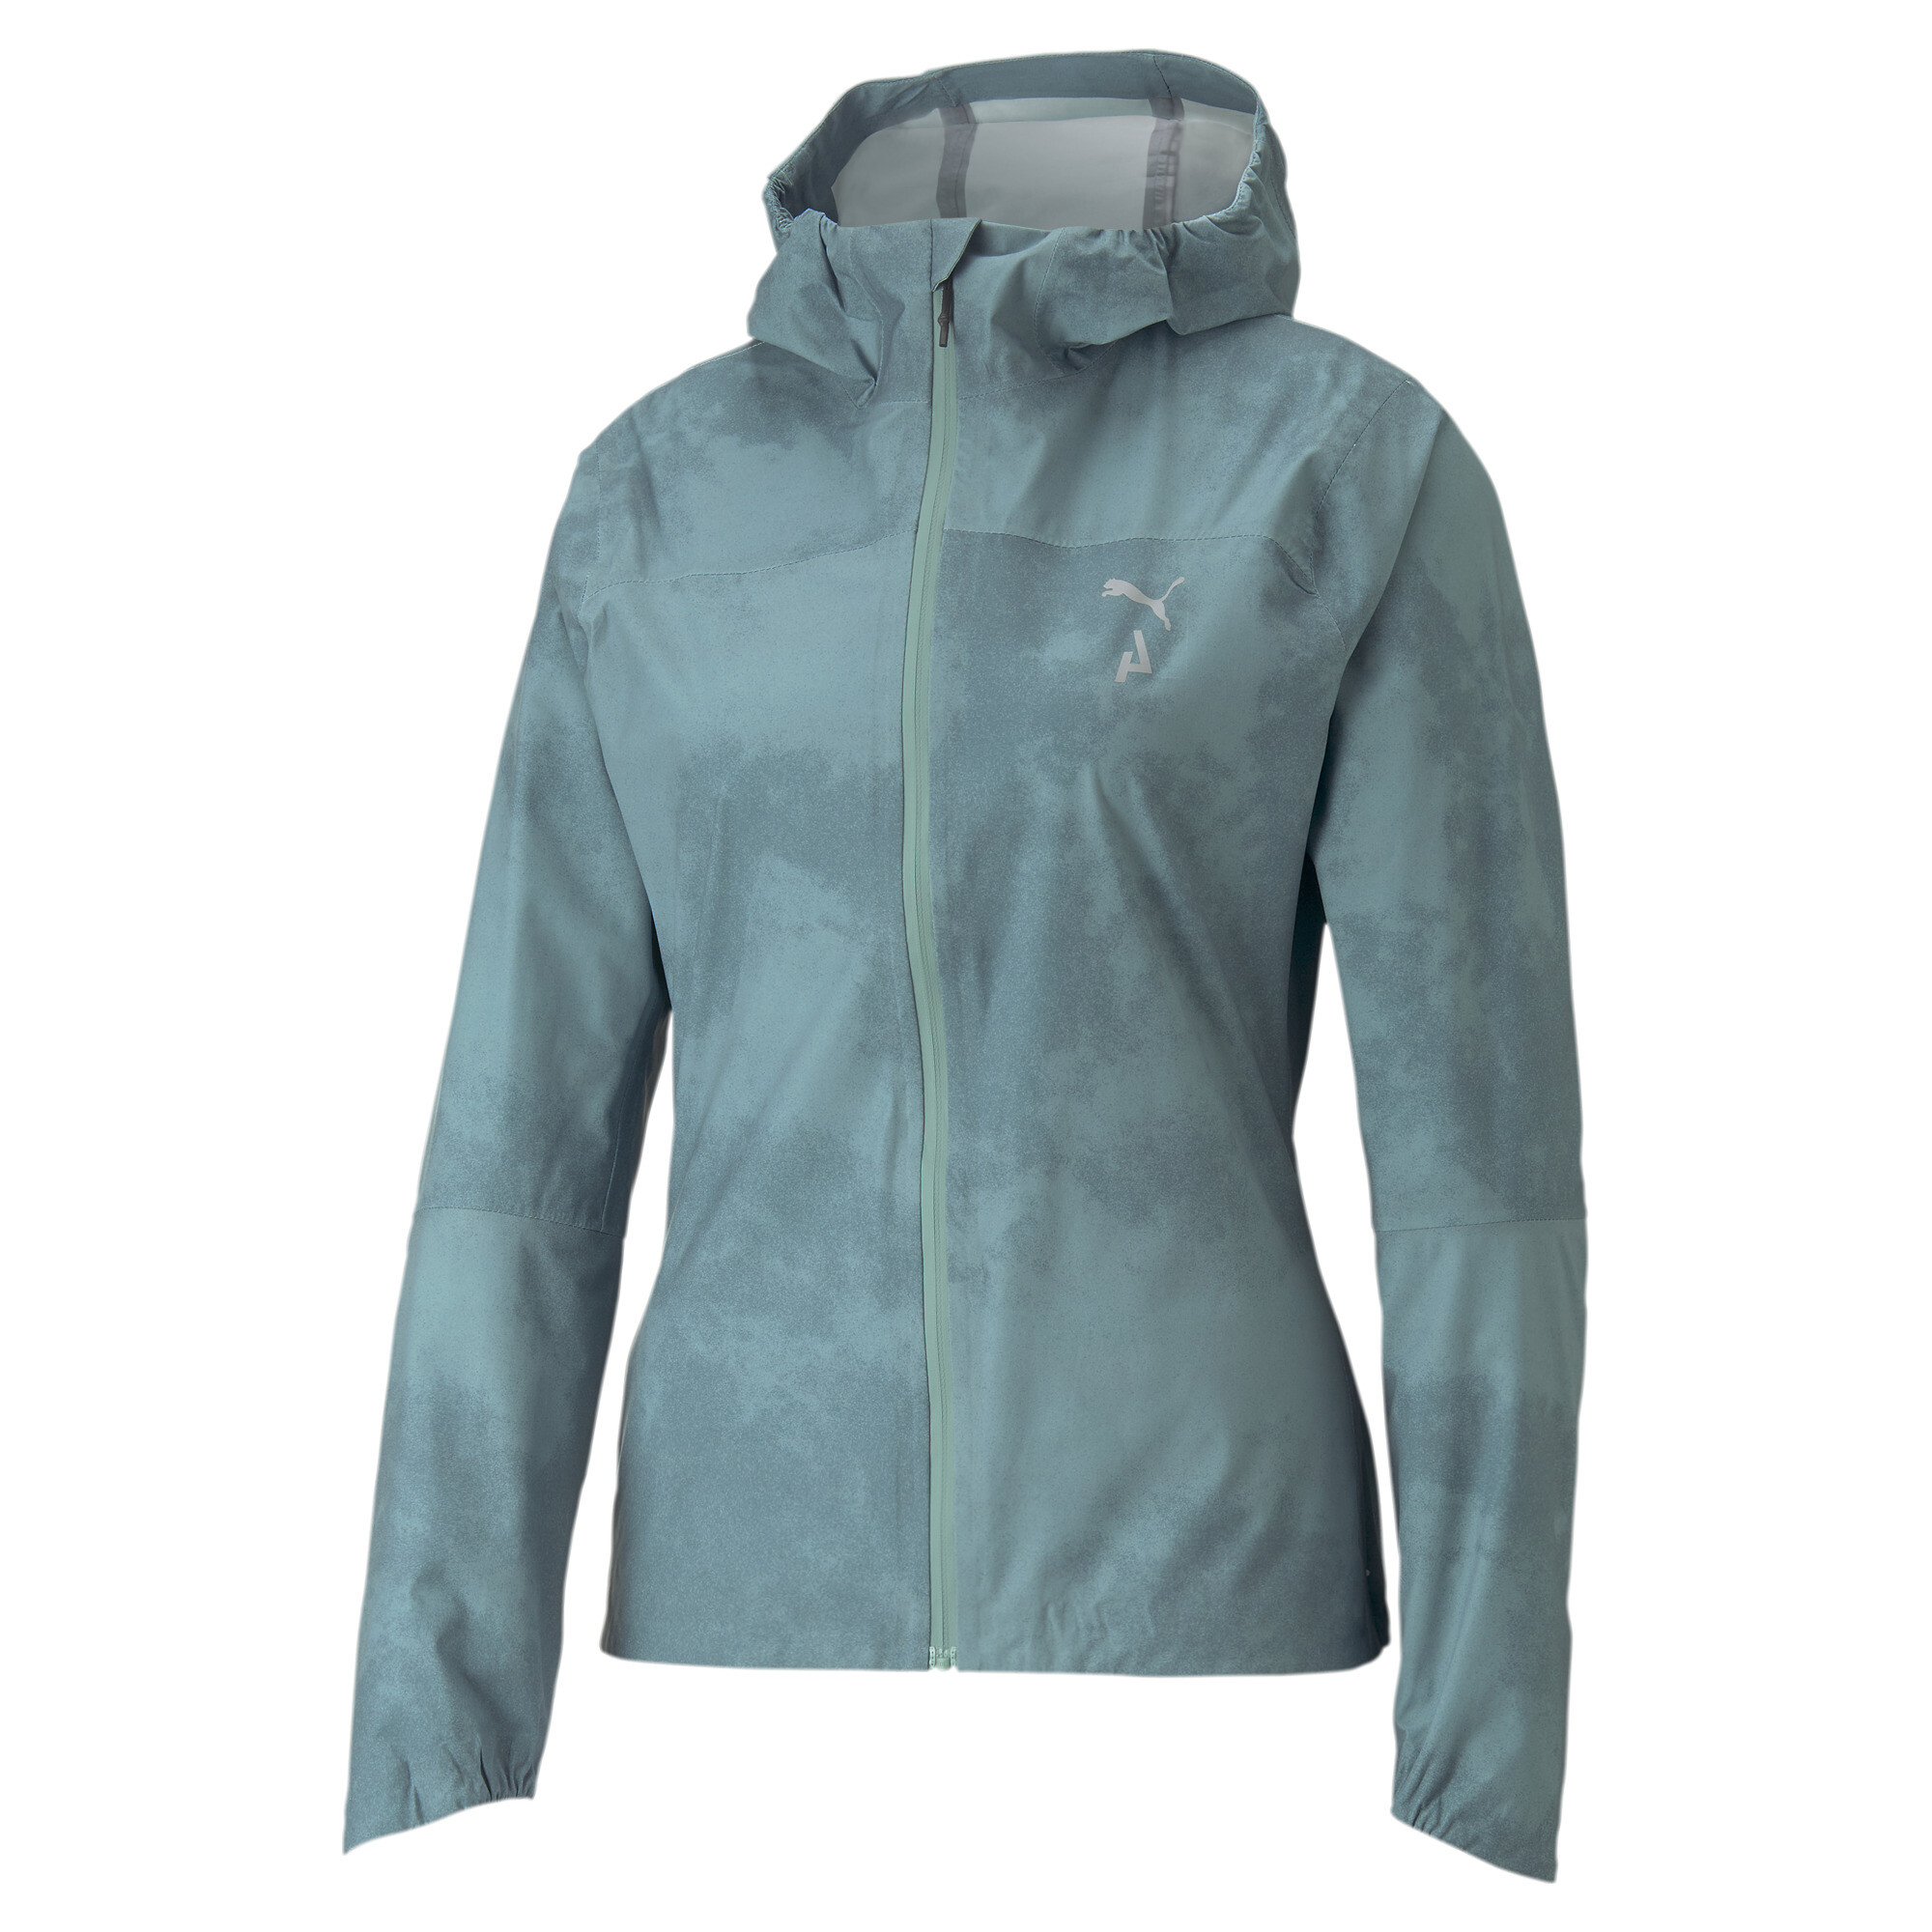 Women's Puma SEASONS Storm CELL Sympa TexÂ® Packable Trail Running Jacket, Gray, Size S, Clothing